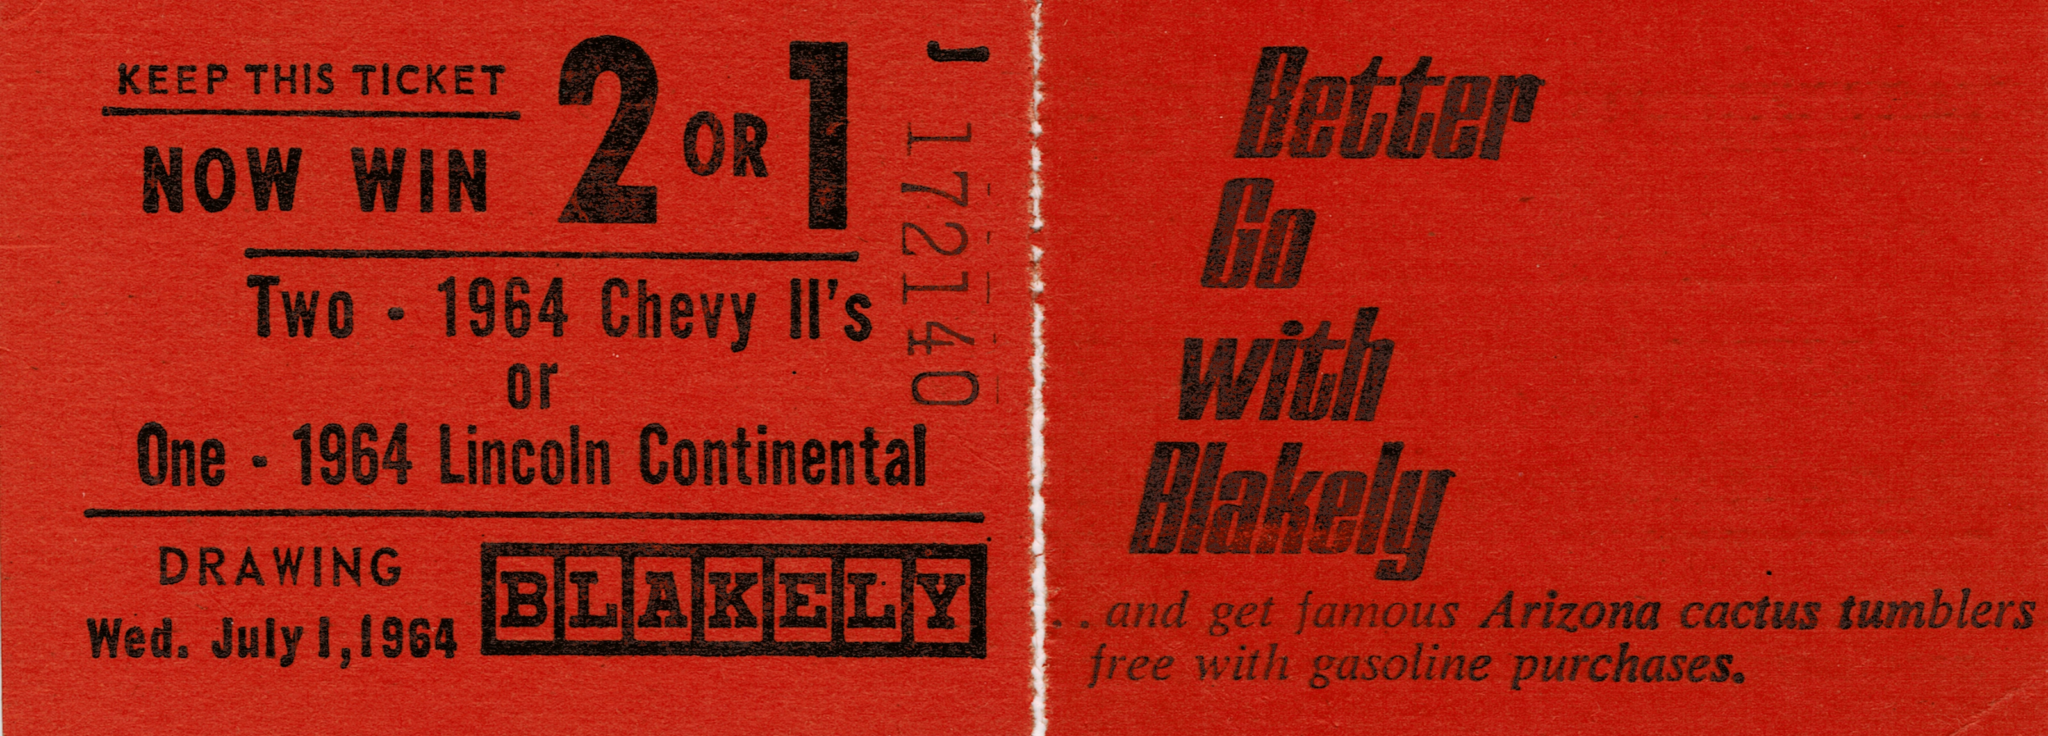 Blakely Gas Station 1964 Car Drawing